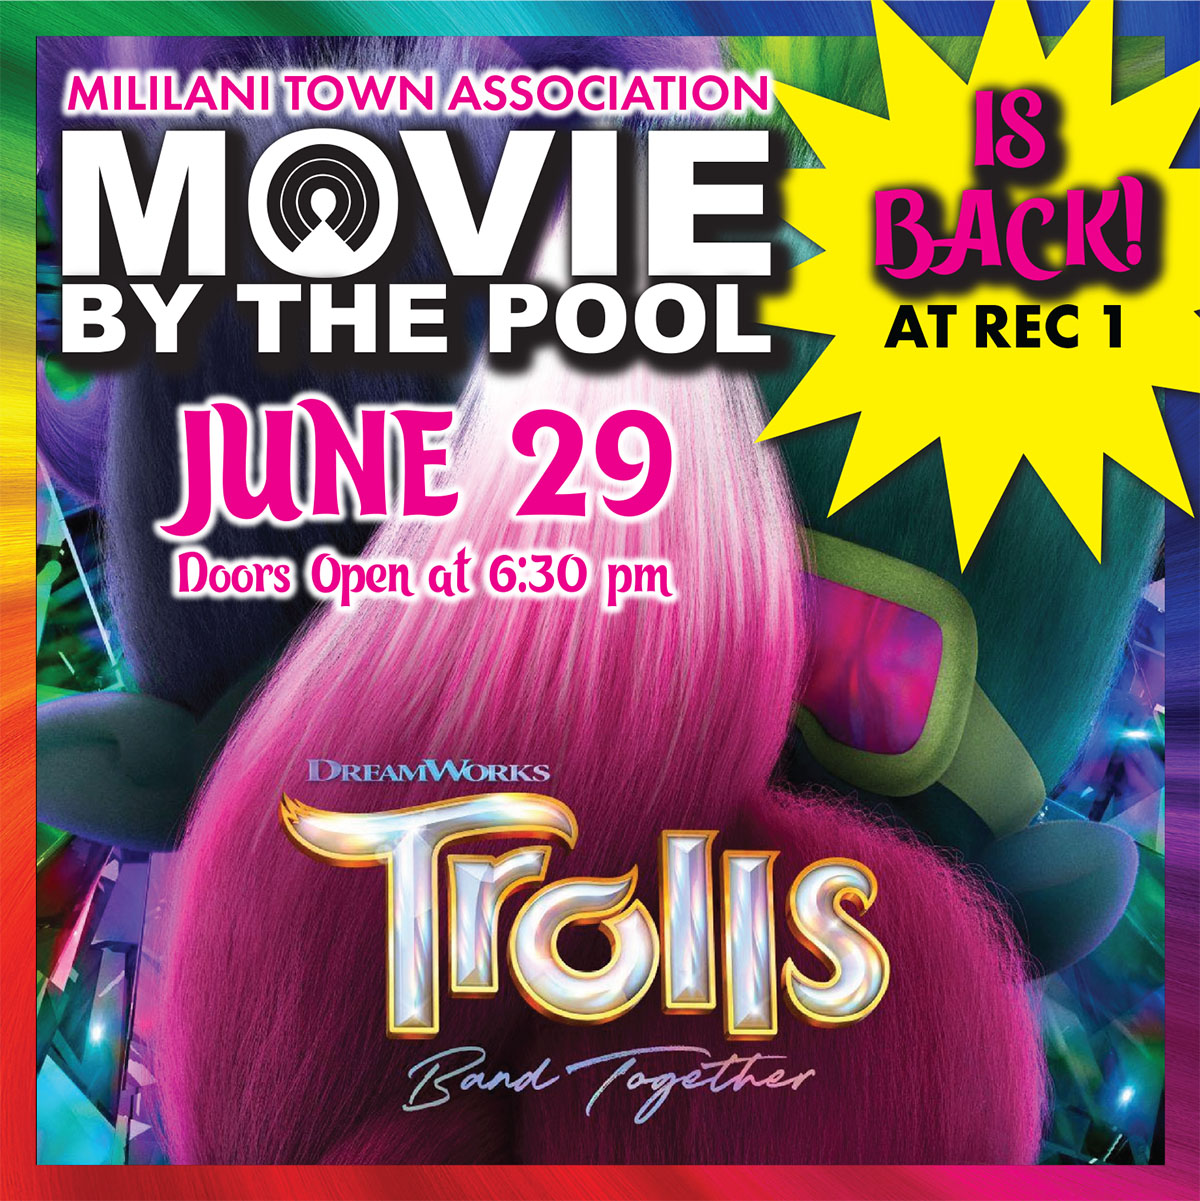 Mililani Town Association Movie by the Pool | Trolls Band Together